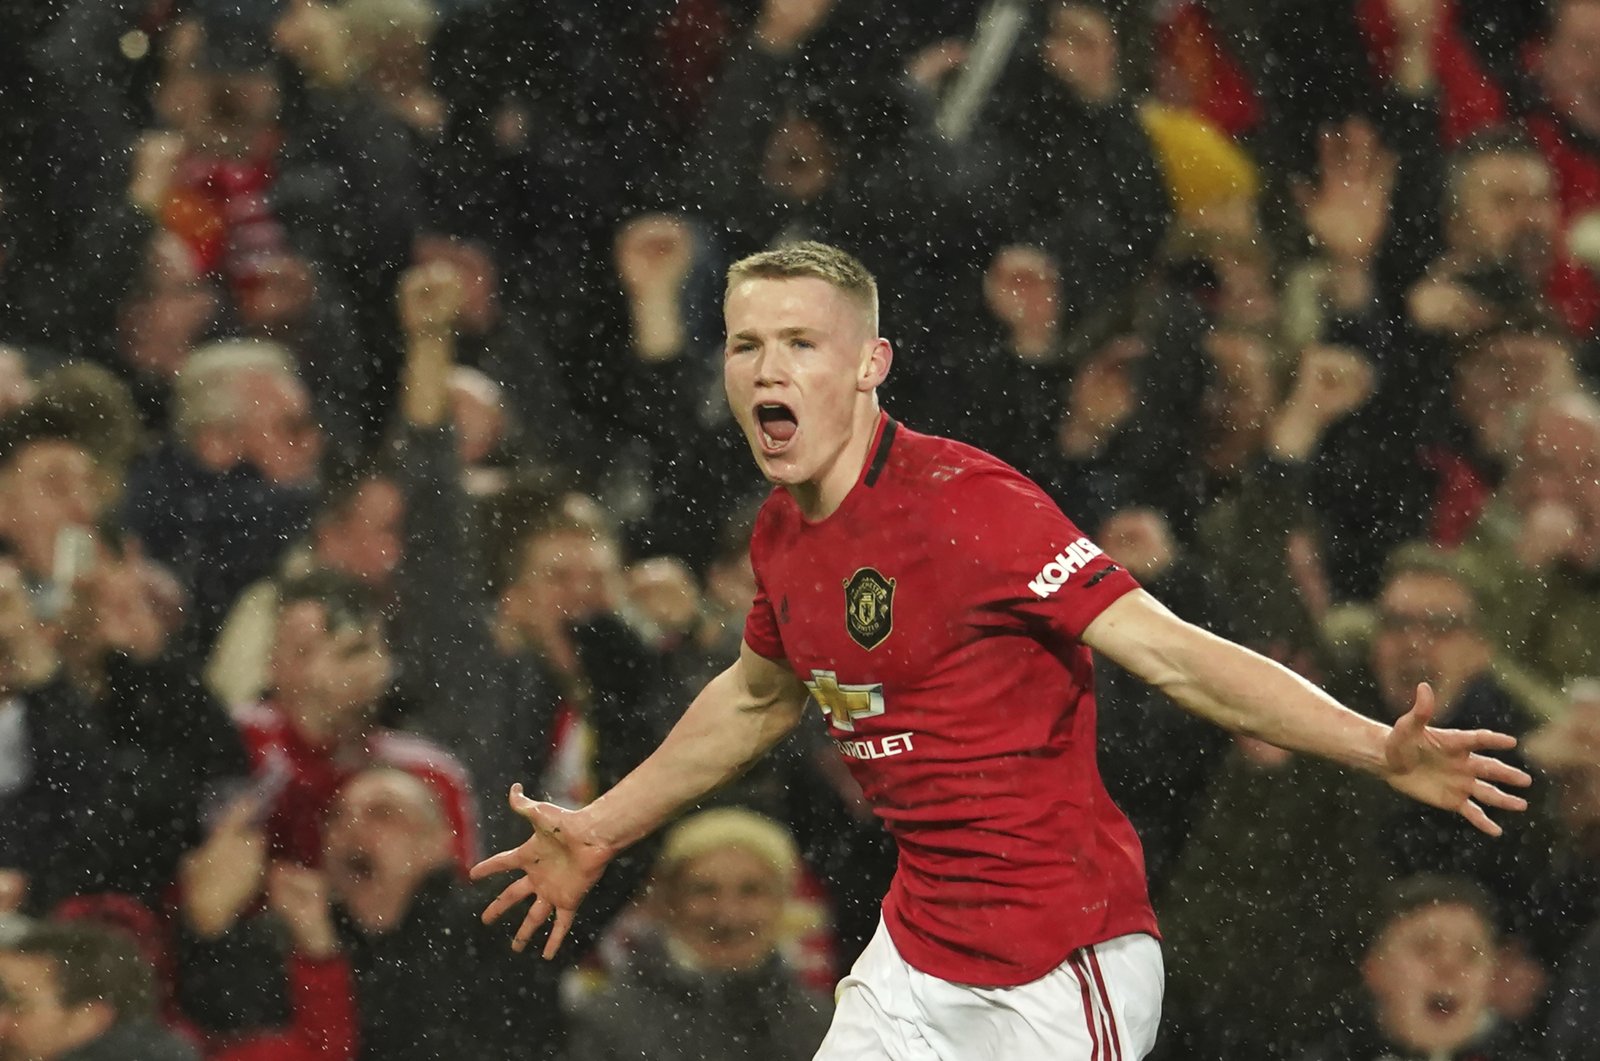 Manchester United's Scott McTominay celebrates a goal during a Premier League match against Manchester City, in Manchester, England, March 8, 2020. (AP Photo)